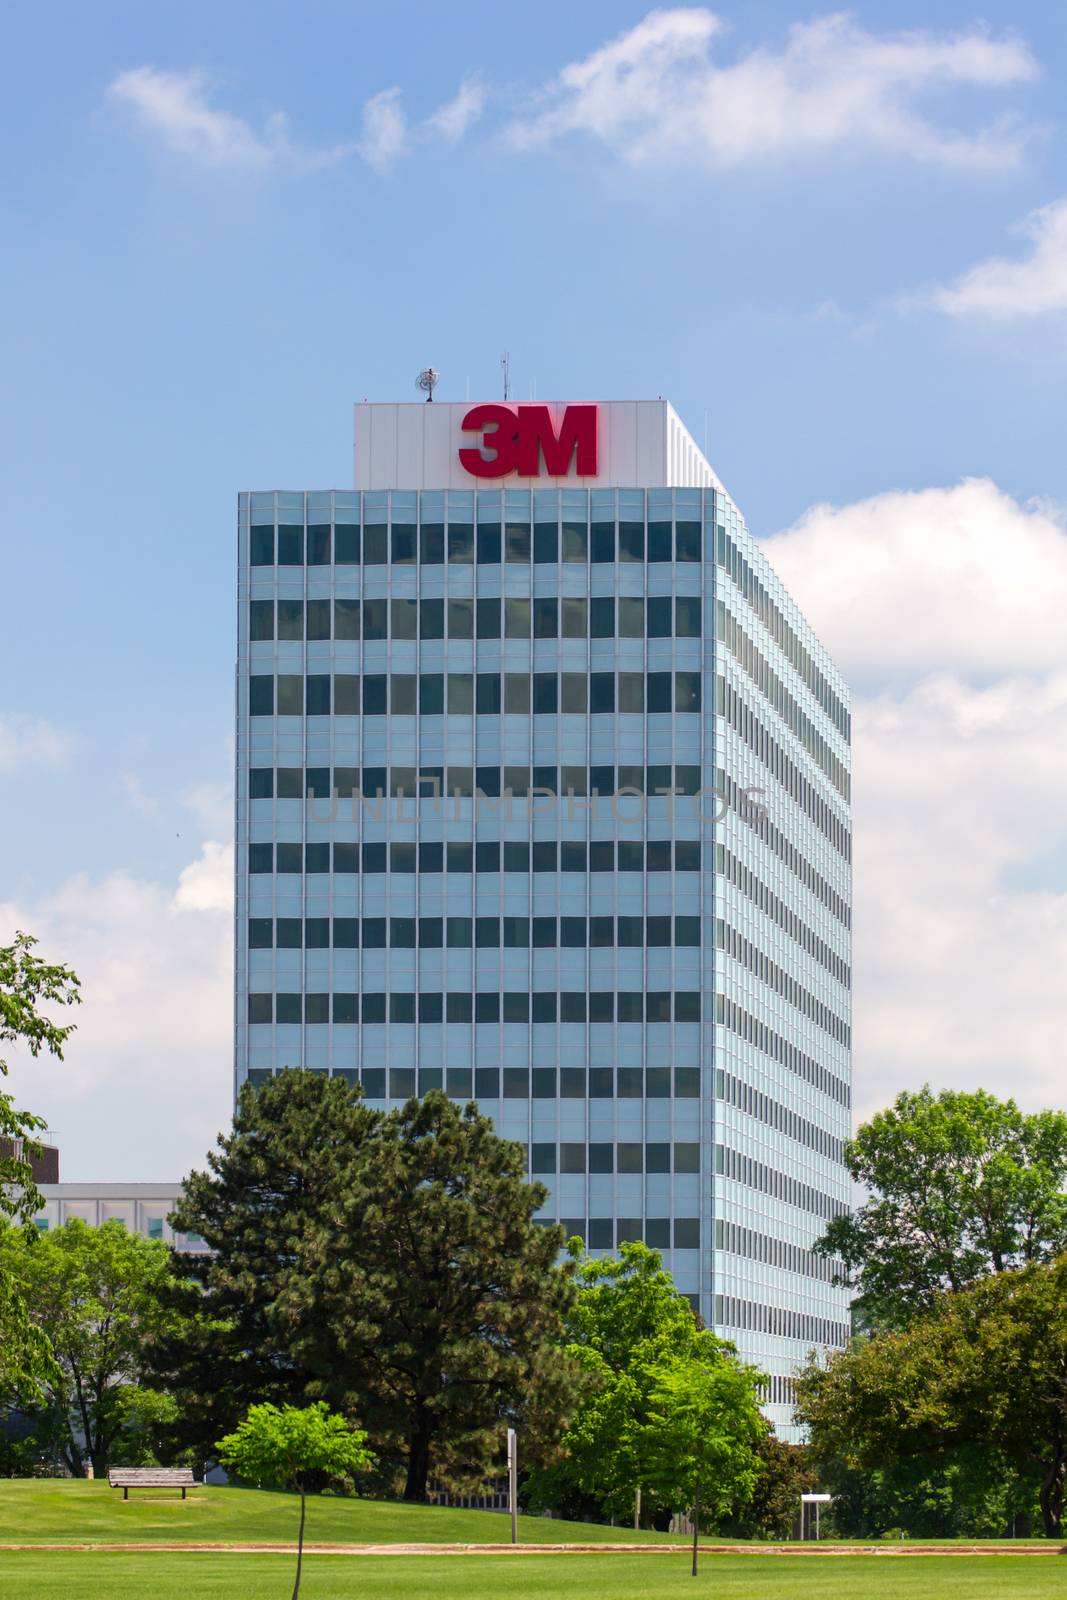 MAPLEWOOD, MN/USA - JUNE 20, 2014: 3M corporate headquarters building. 3M is a worldwide manufacturer of industrial and consumer products and employes 88,000 people worldwide.